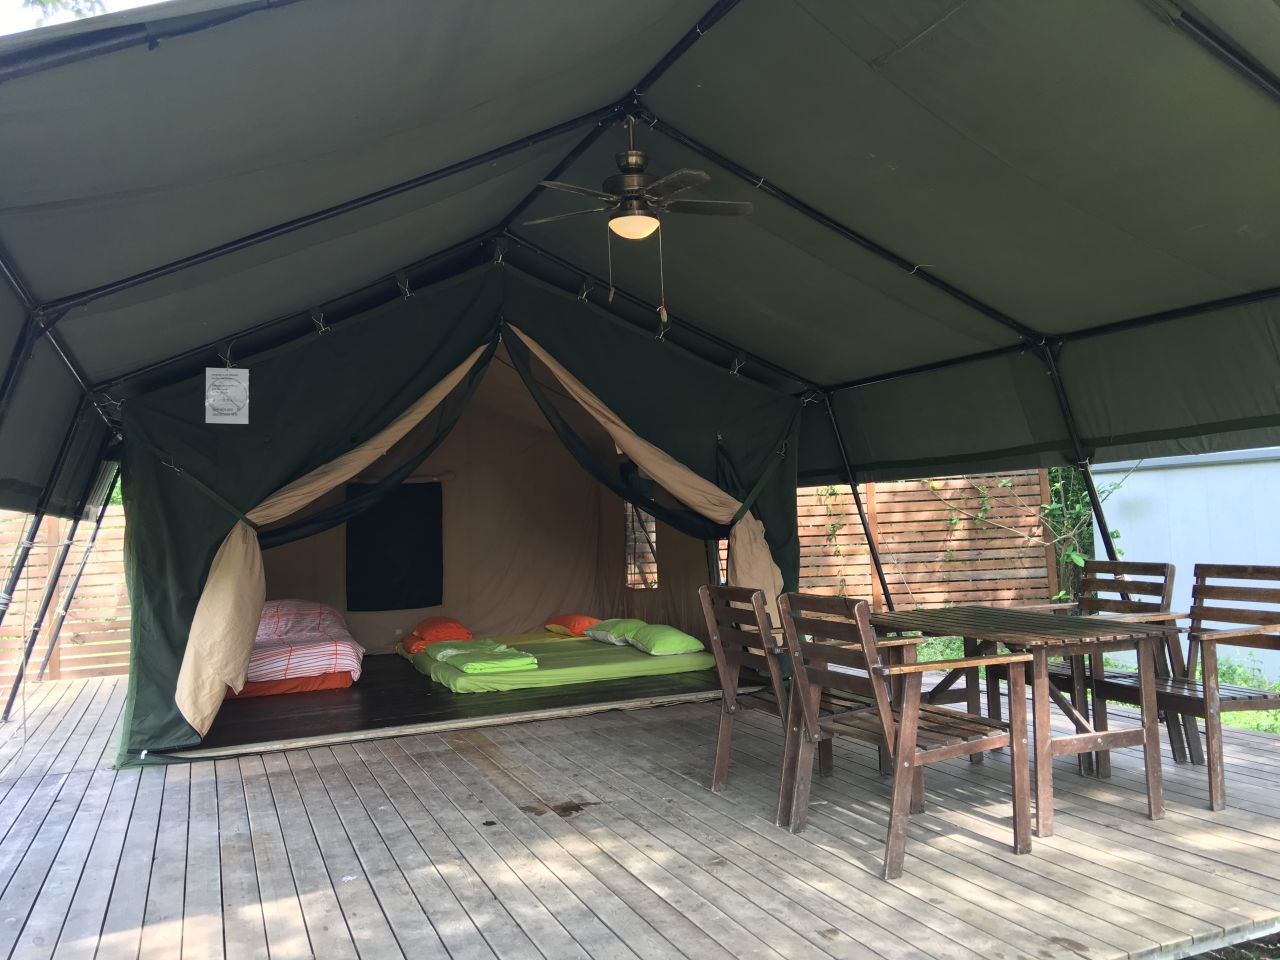 <strong>Long Coast Seasports:</strong> A more upscale option is Long Coast Seasports, about 10 minutes south by taxi in Lower Cheung Sha Village. This outfit offers safari-like deluxe canvas tents, complete with mattresses, wooden floors, air-conditioning and lots of elbow room.